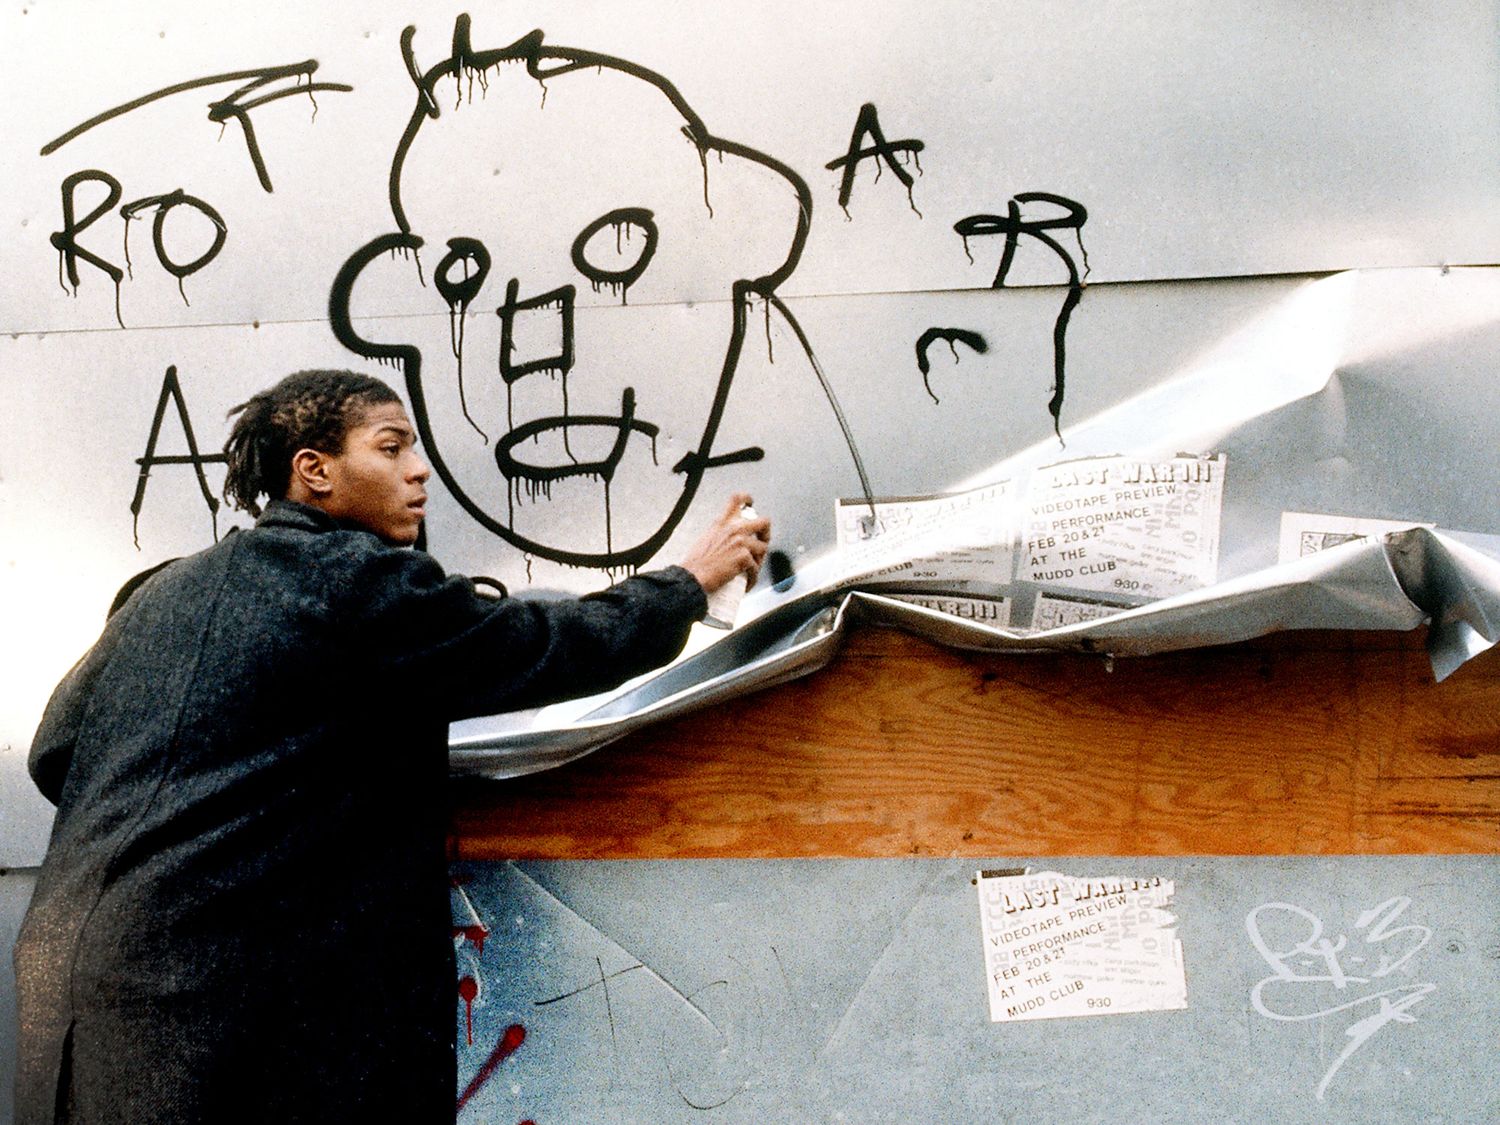 Jean-Michel Basquiat caught in the act of spray painting in the streets of New York for the film Downtown 81 produced between 1980-81 but only broadcast in 2001 (image taken from the film).